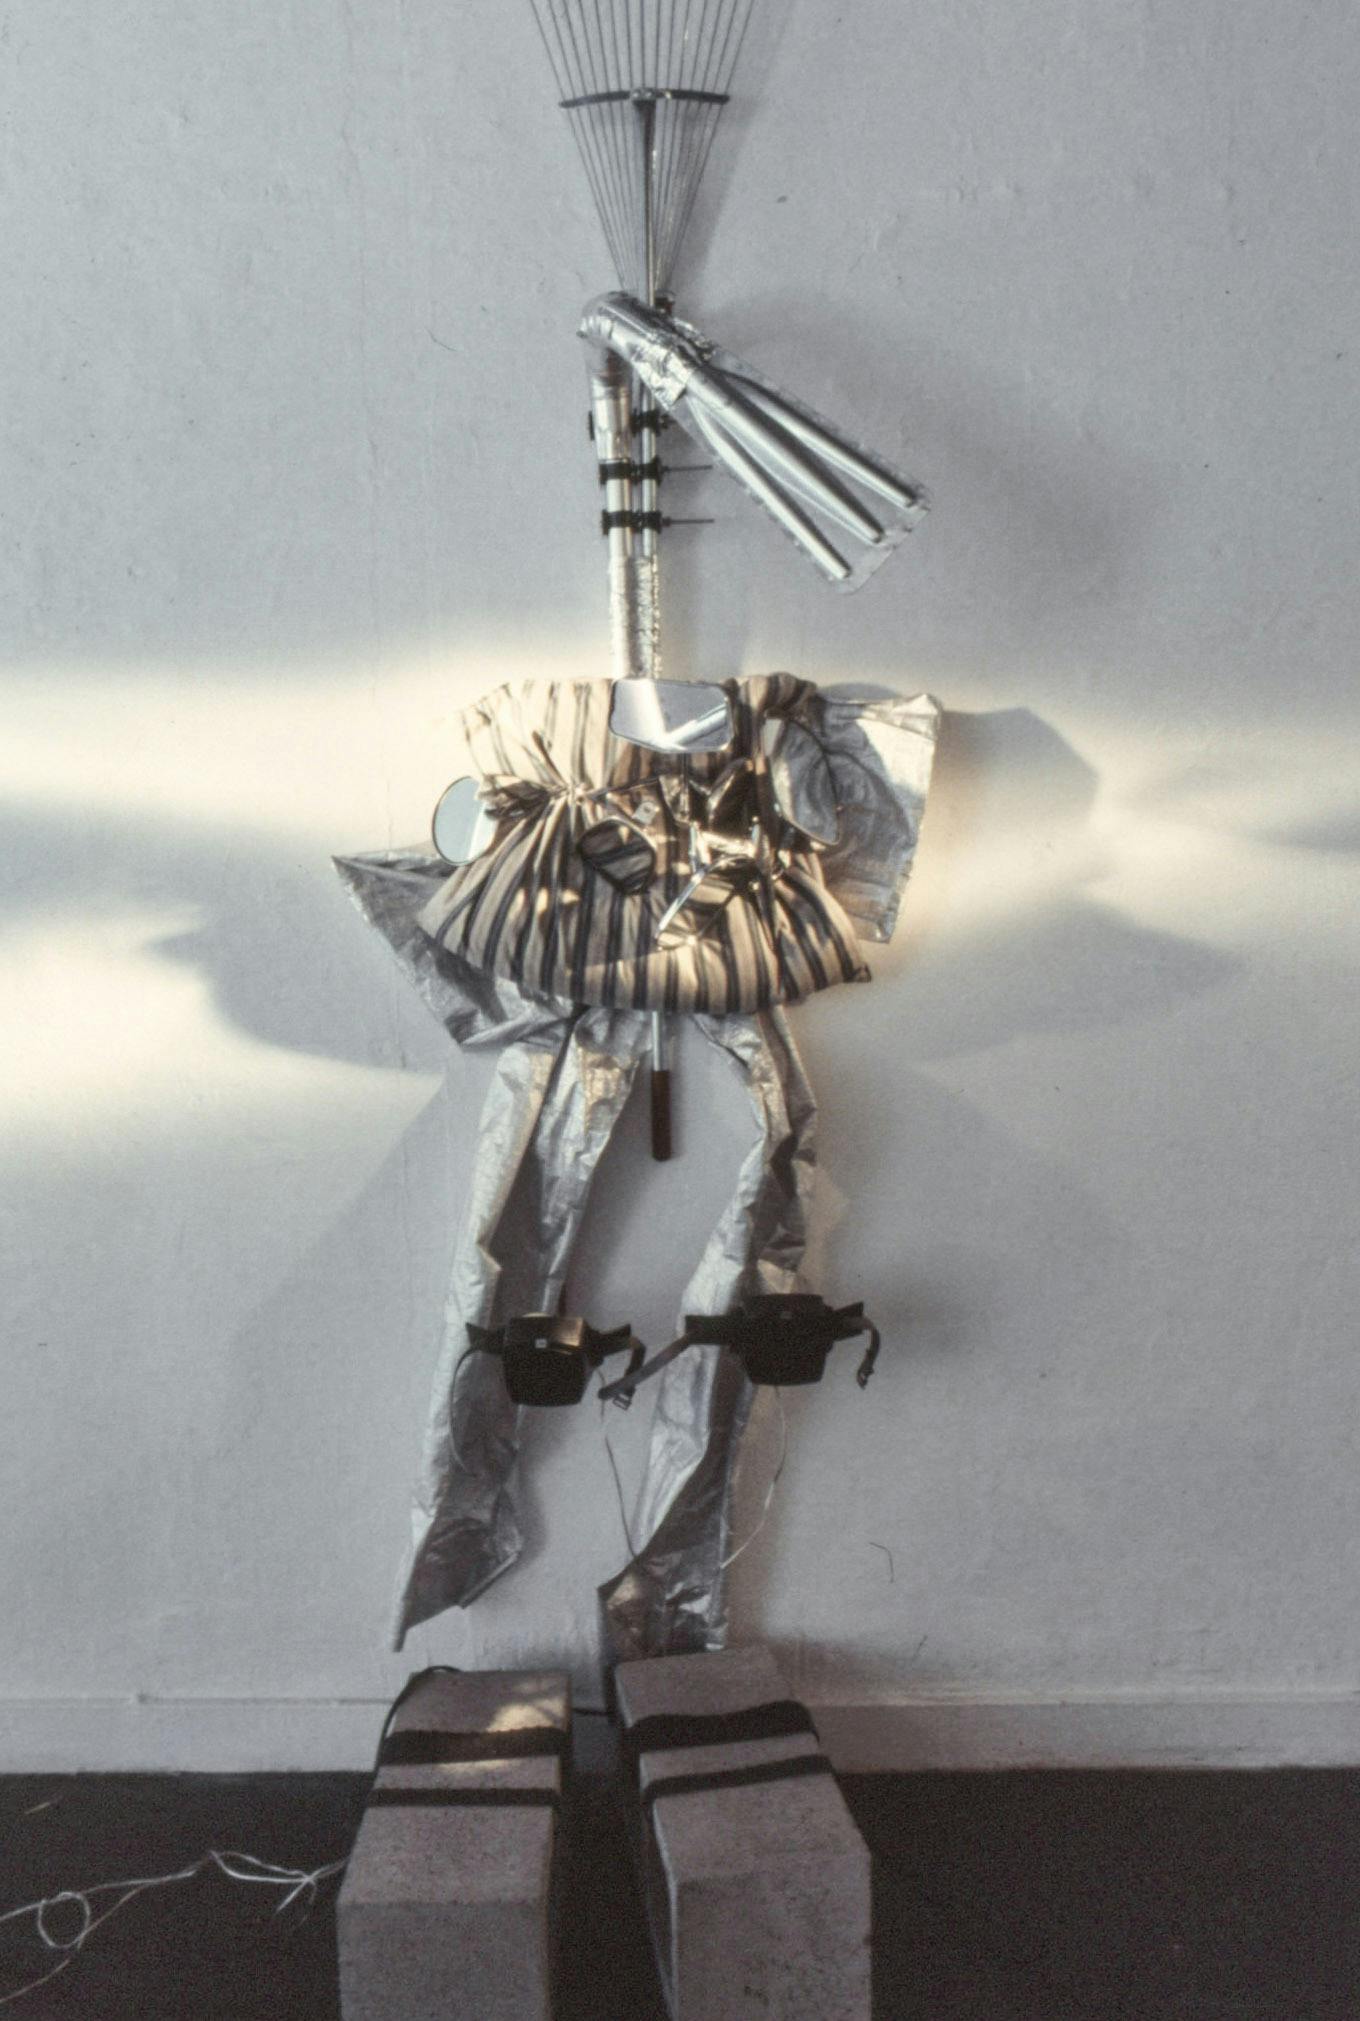 A closeup of a sculpture mounted on a wall. The sculpture is made of various readymade elements, including: cement bricks, tin foil, wires, side mirrors, metal tubes, and a rake. 